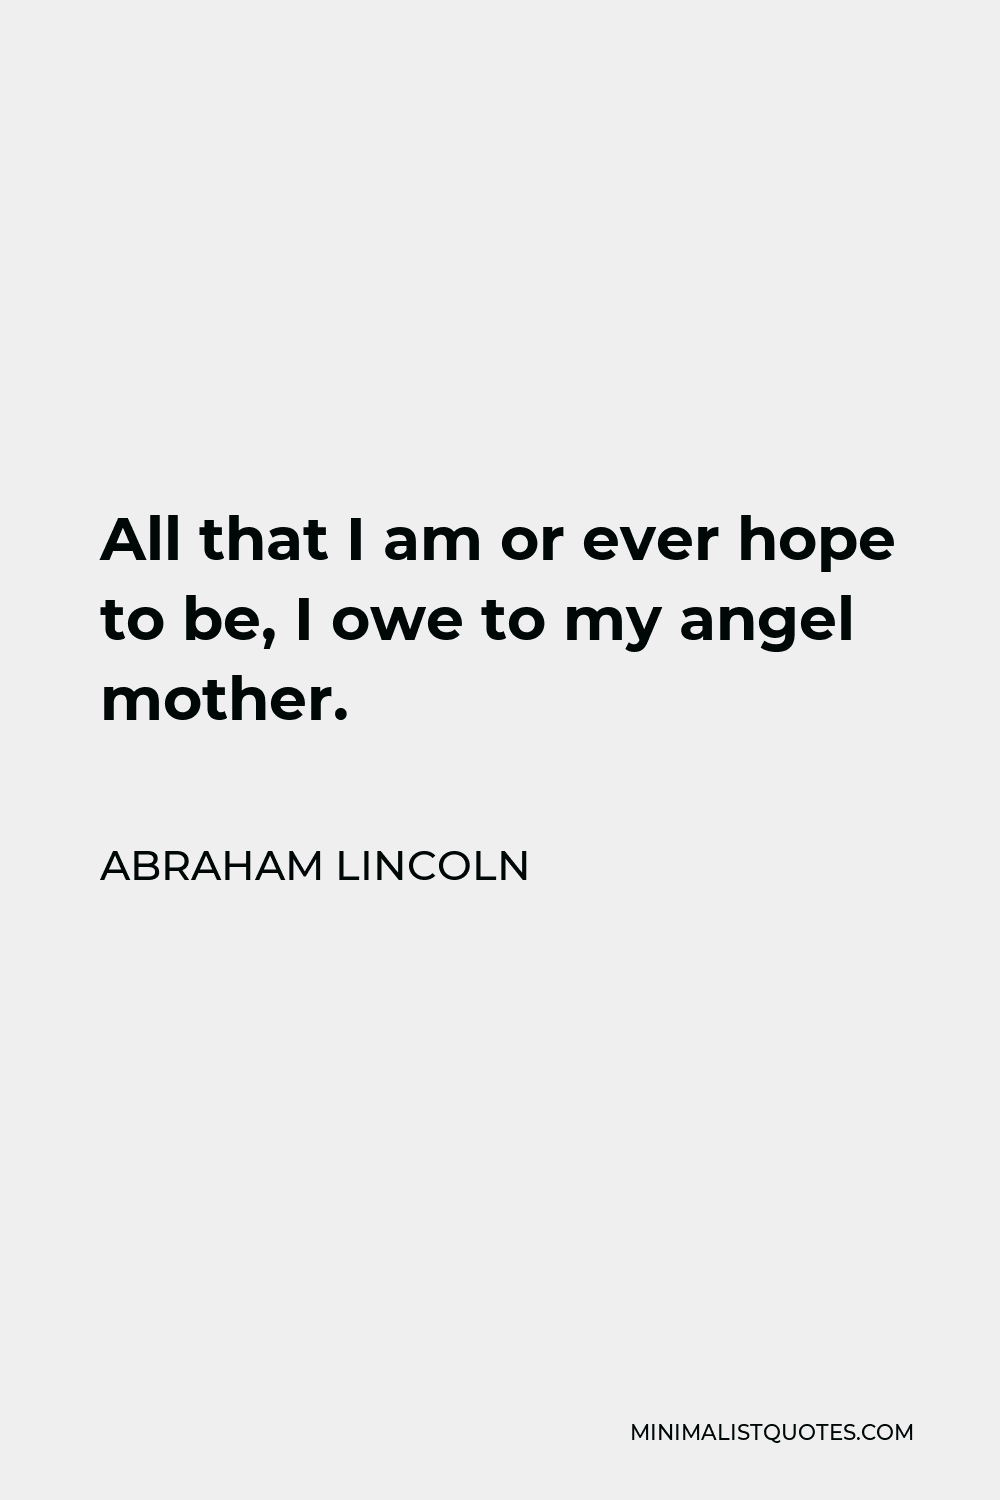 Abraham Lincoln Quote - All that I am or ever hope to be, I owe to my angel mother.